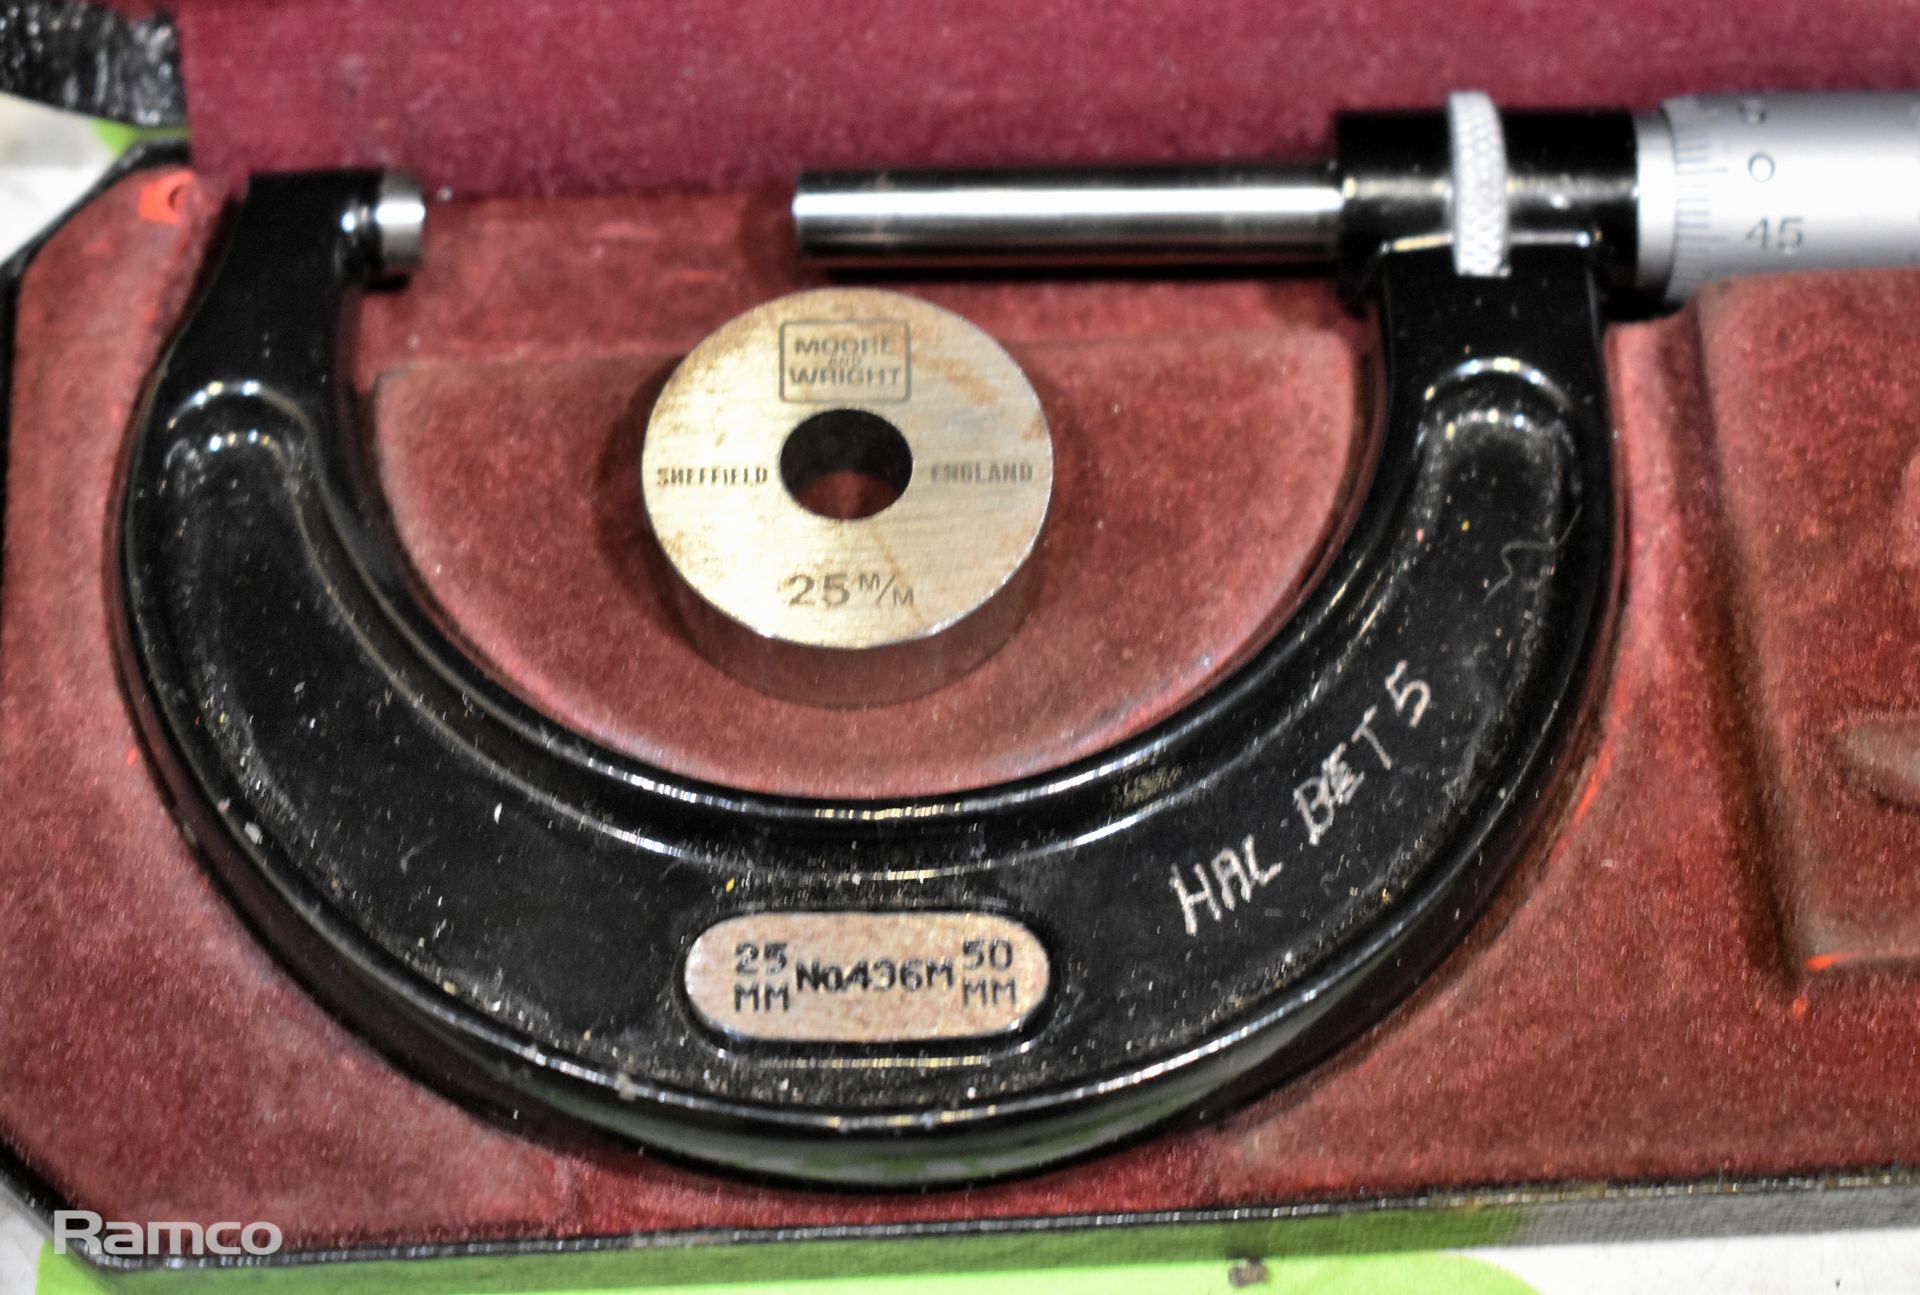 2x Starrett No 436 25-50mm micrometer calipers with case (incomplete) - Image 5 of 6